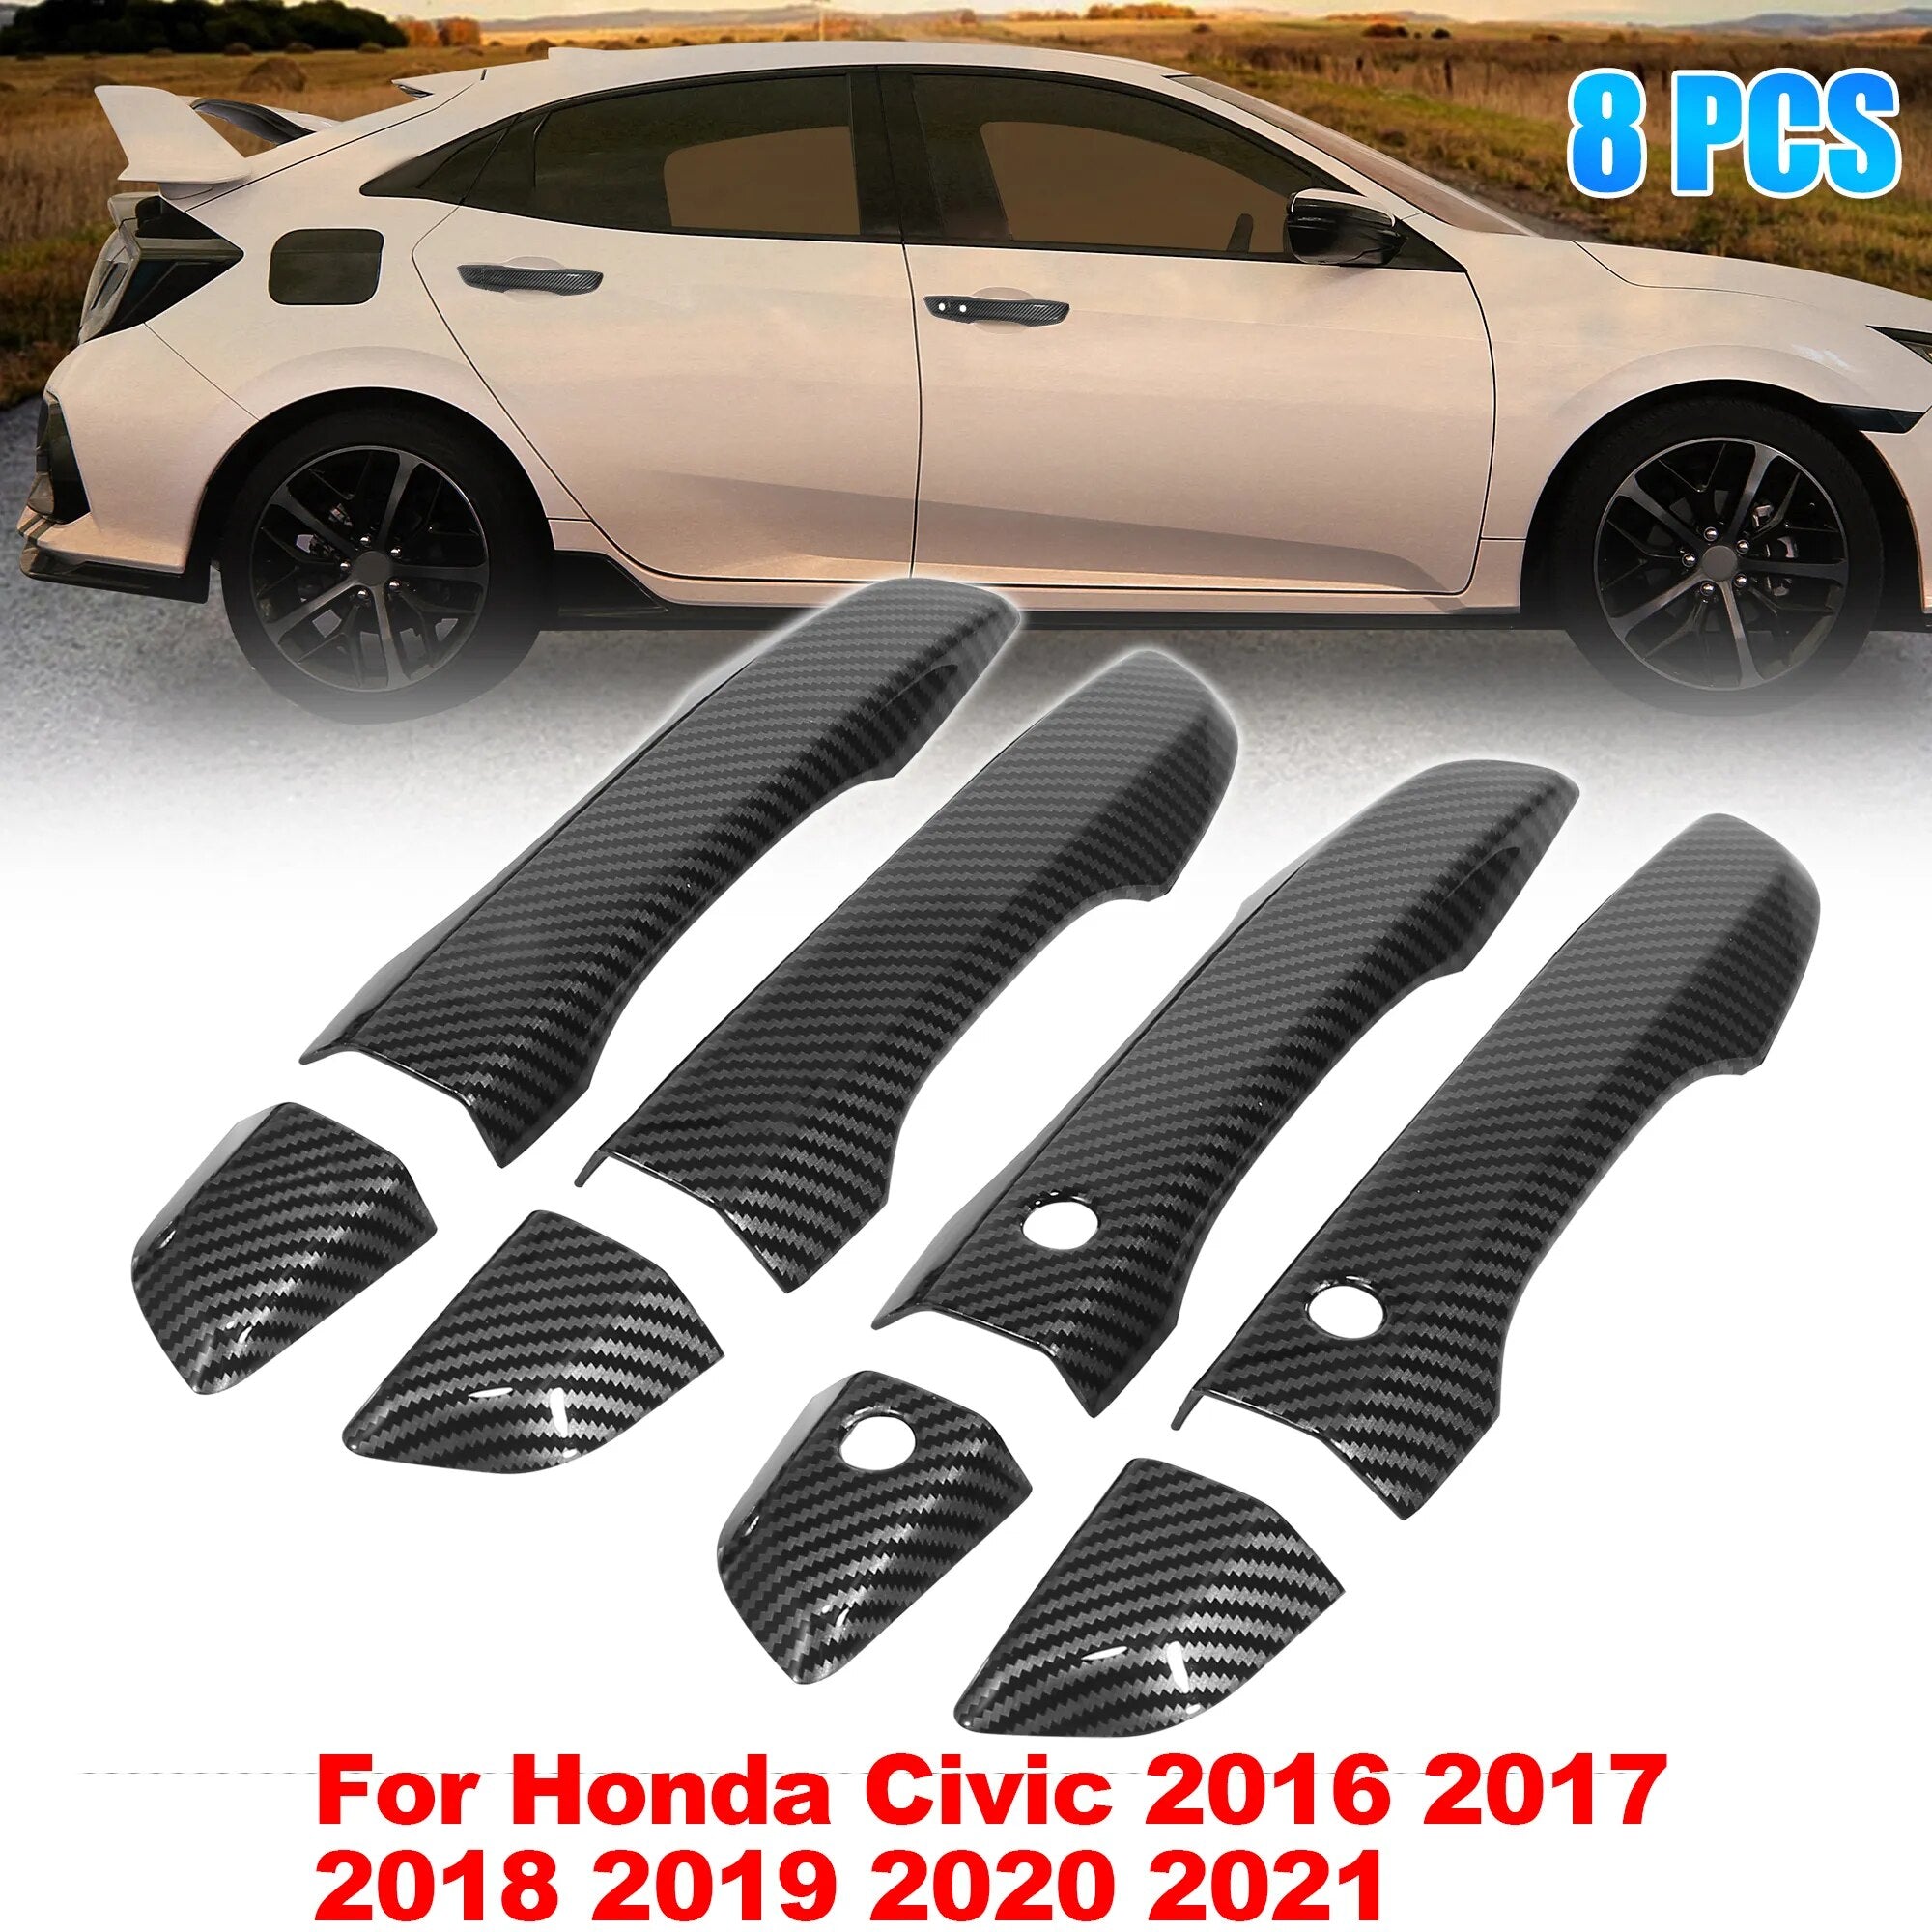 Uxcell 8pcs Door Handle Trim Cover With Keyless Entry Carbon Fiber For Honda Civic 2016 2017 2018 2019 2020 2021 10th Gen